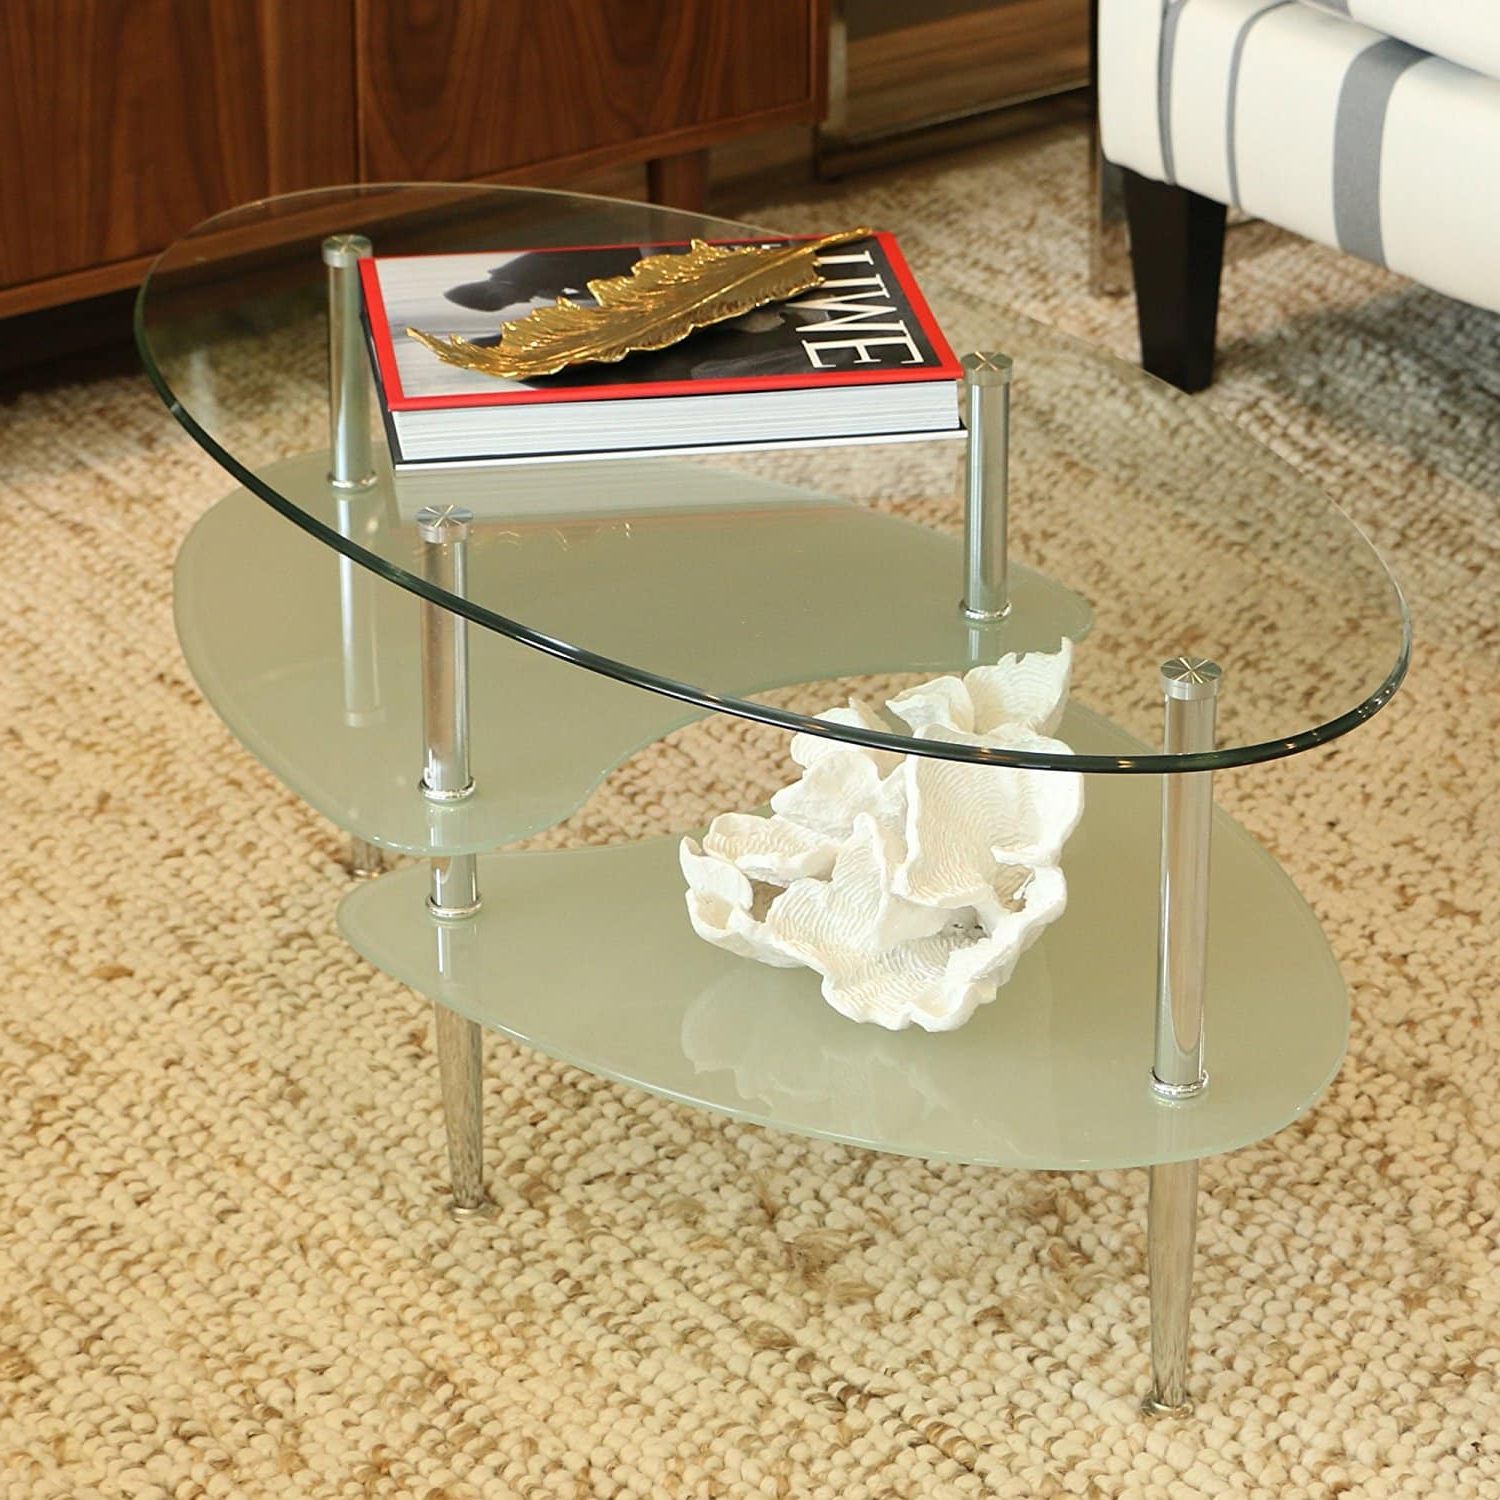 Widely Used Glass Coffee Tables With Lower Shelves Regarding Cheap Coffee Tables: The Ultimate Guide To Coffee Tables Under $ (View 12 of 15)